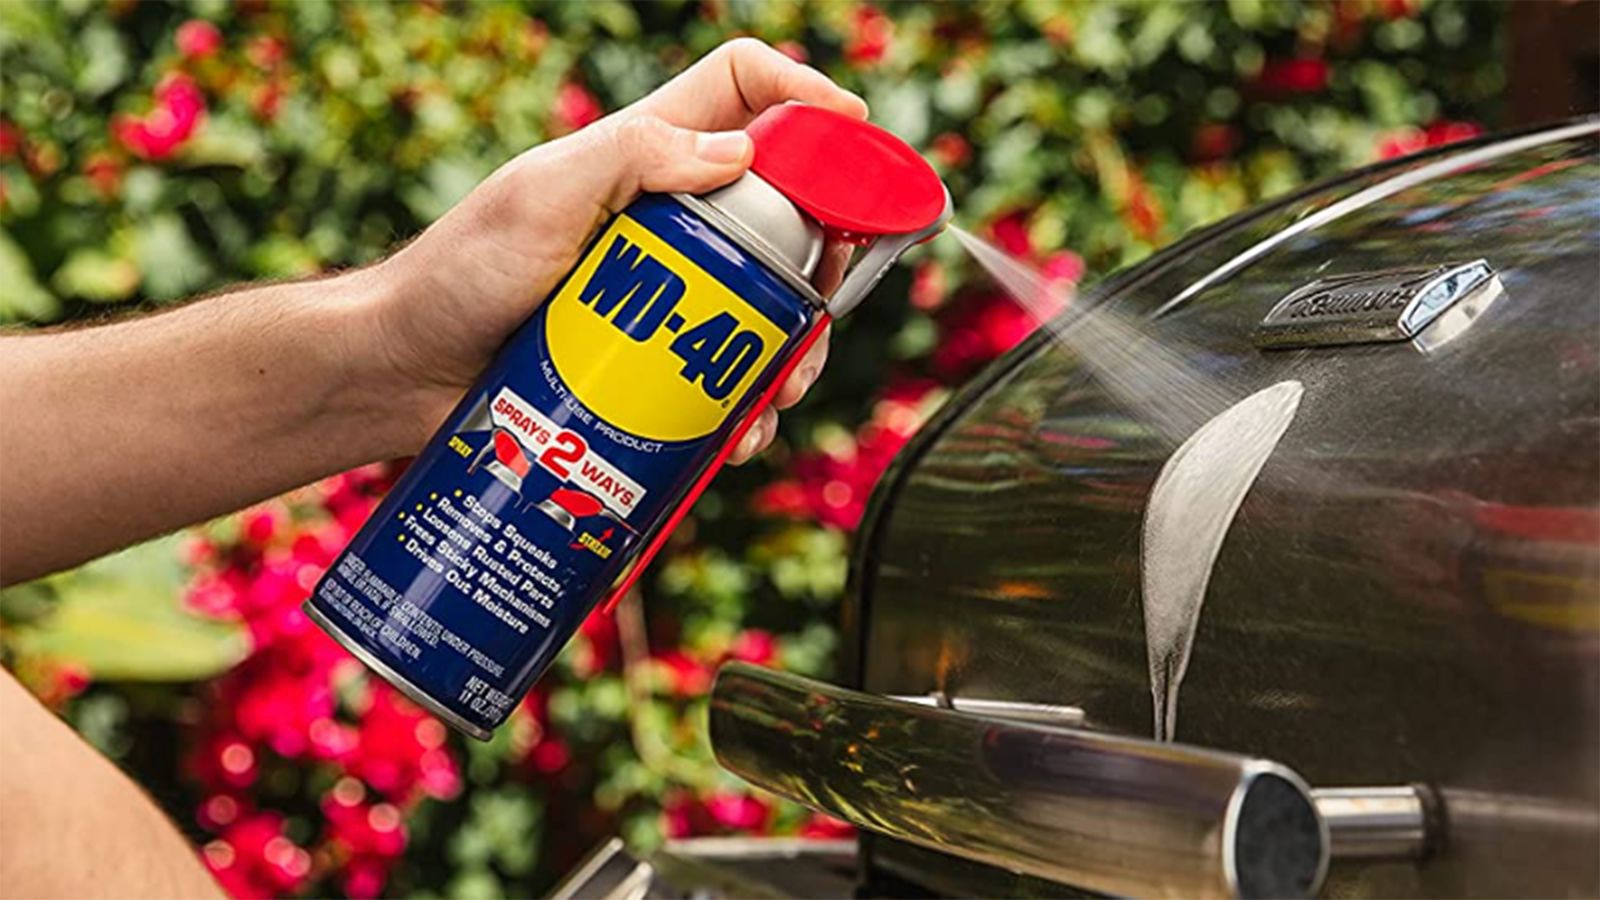 How to clean an oven inside out - WD40 India